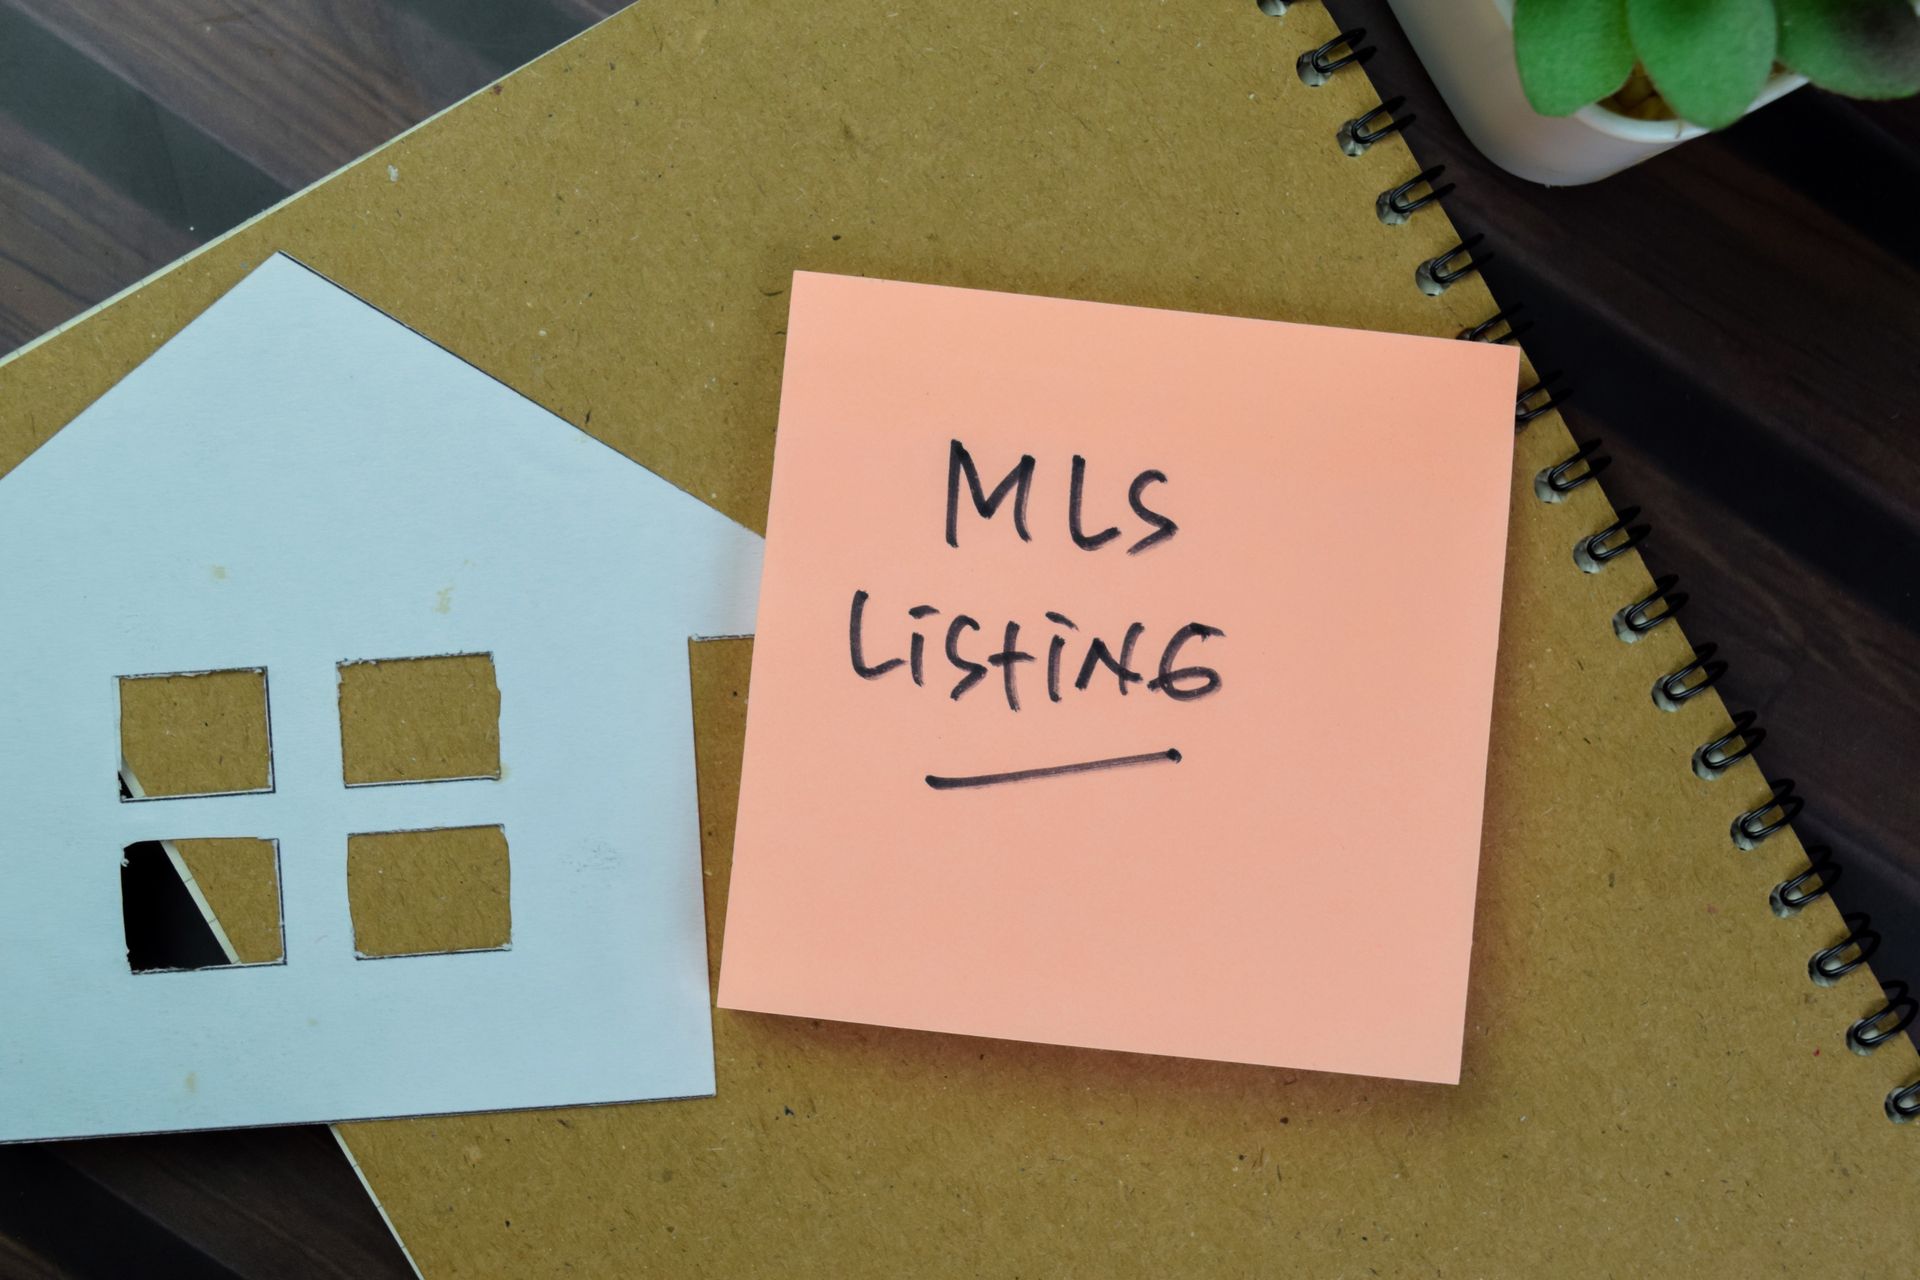 Paper House and sticky note reading MLS Listing